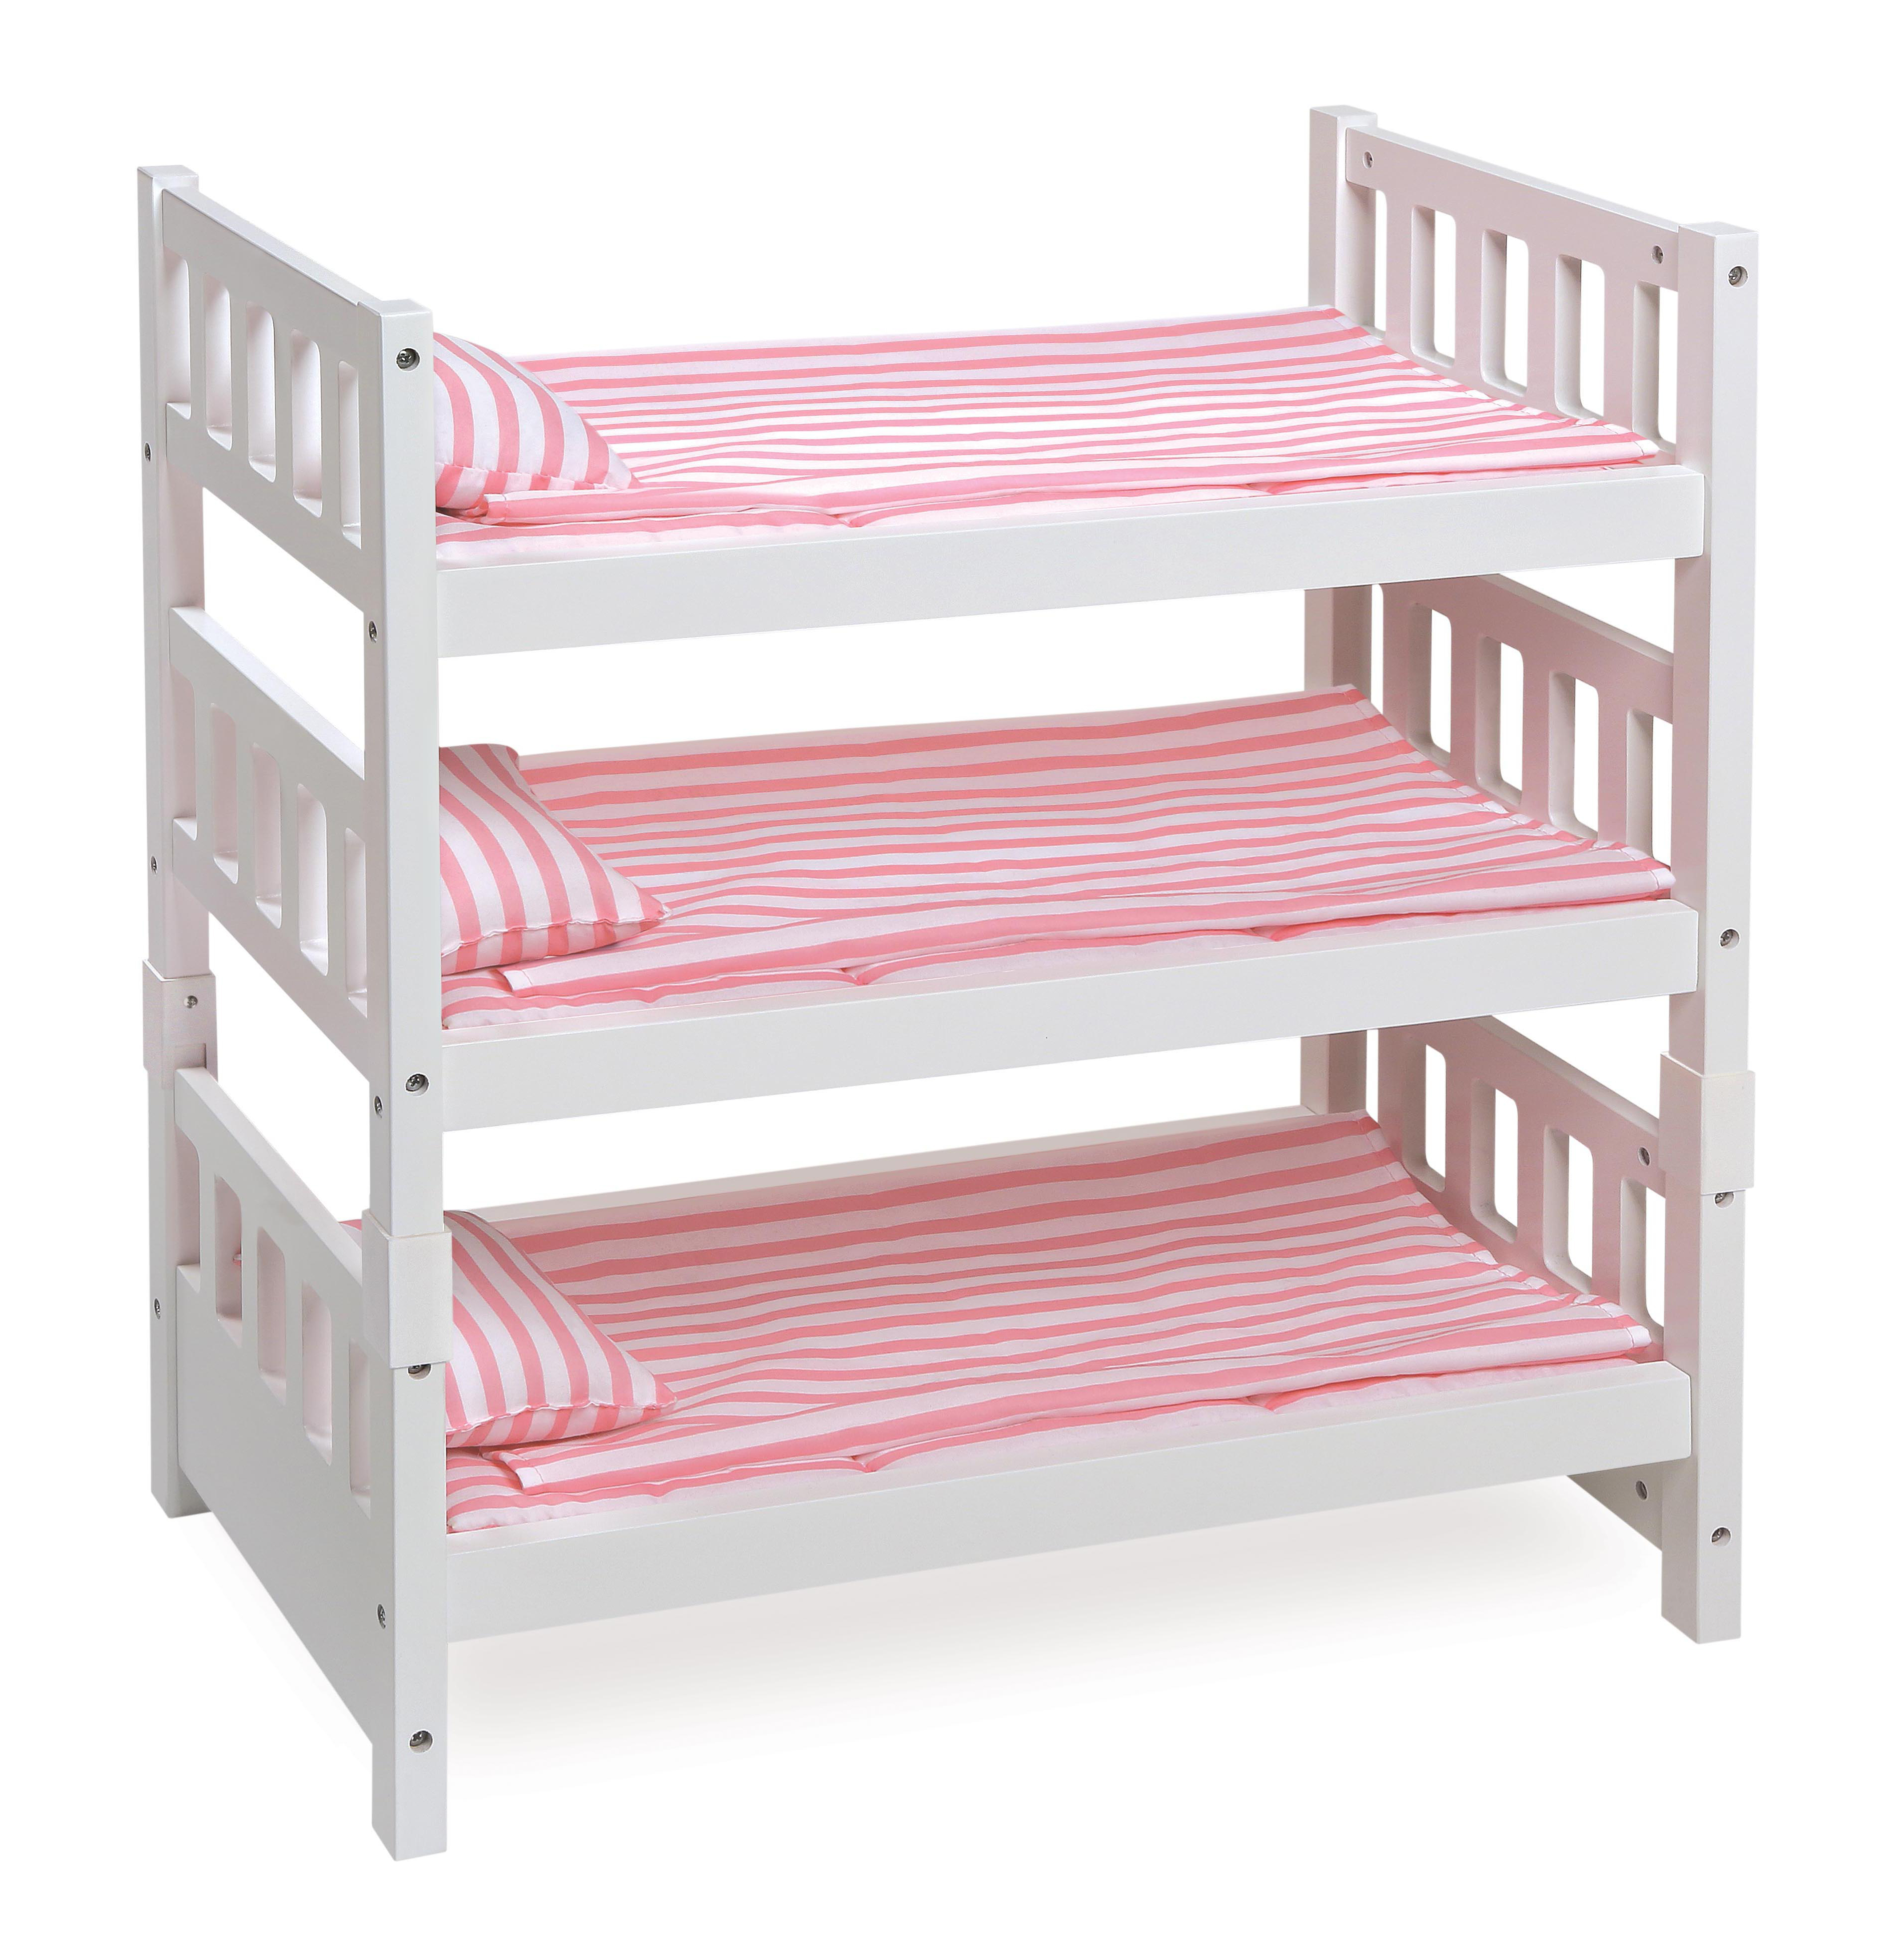 1-2-3 Convertible Doll Bunk Bed with Bedding and Free Personalization Kit - Pink/Stripe